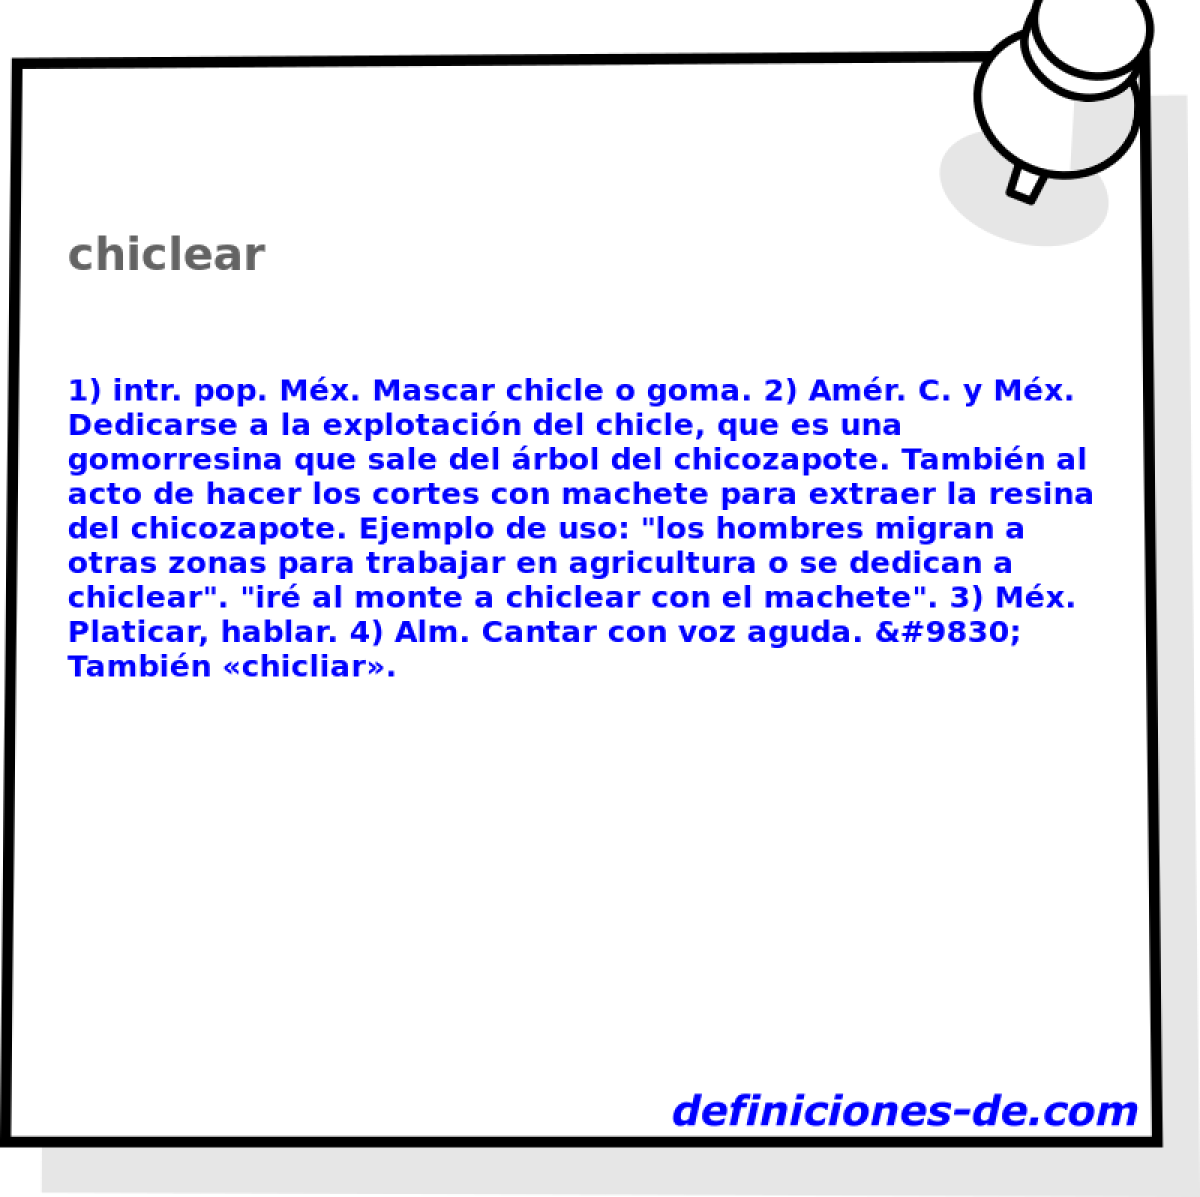 chiclear 